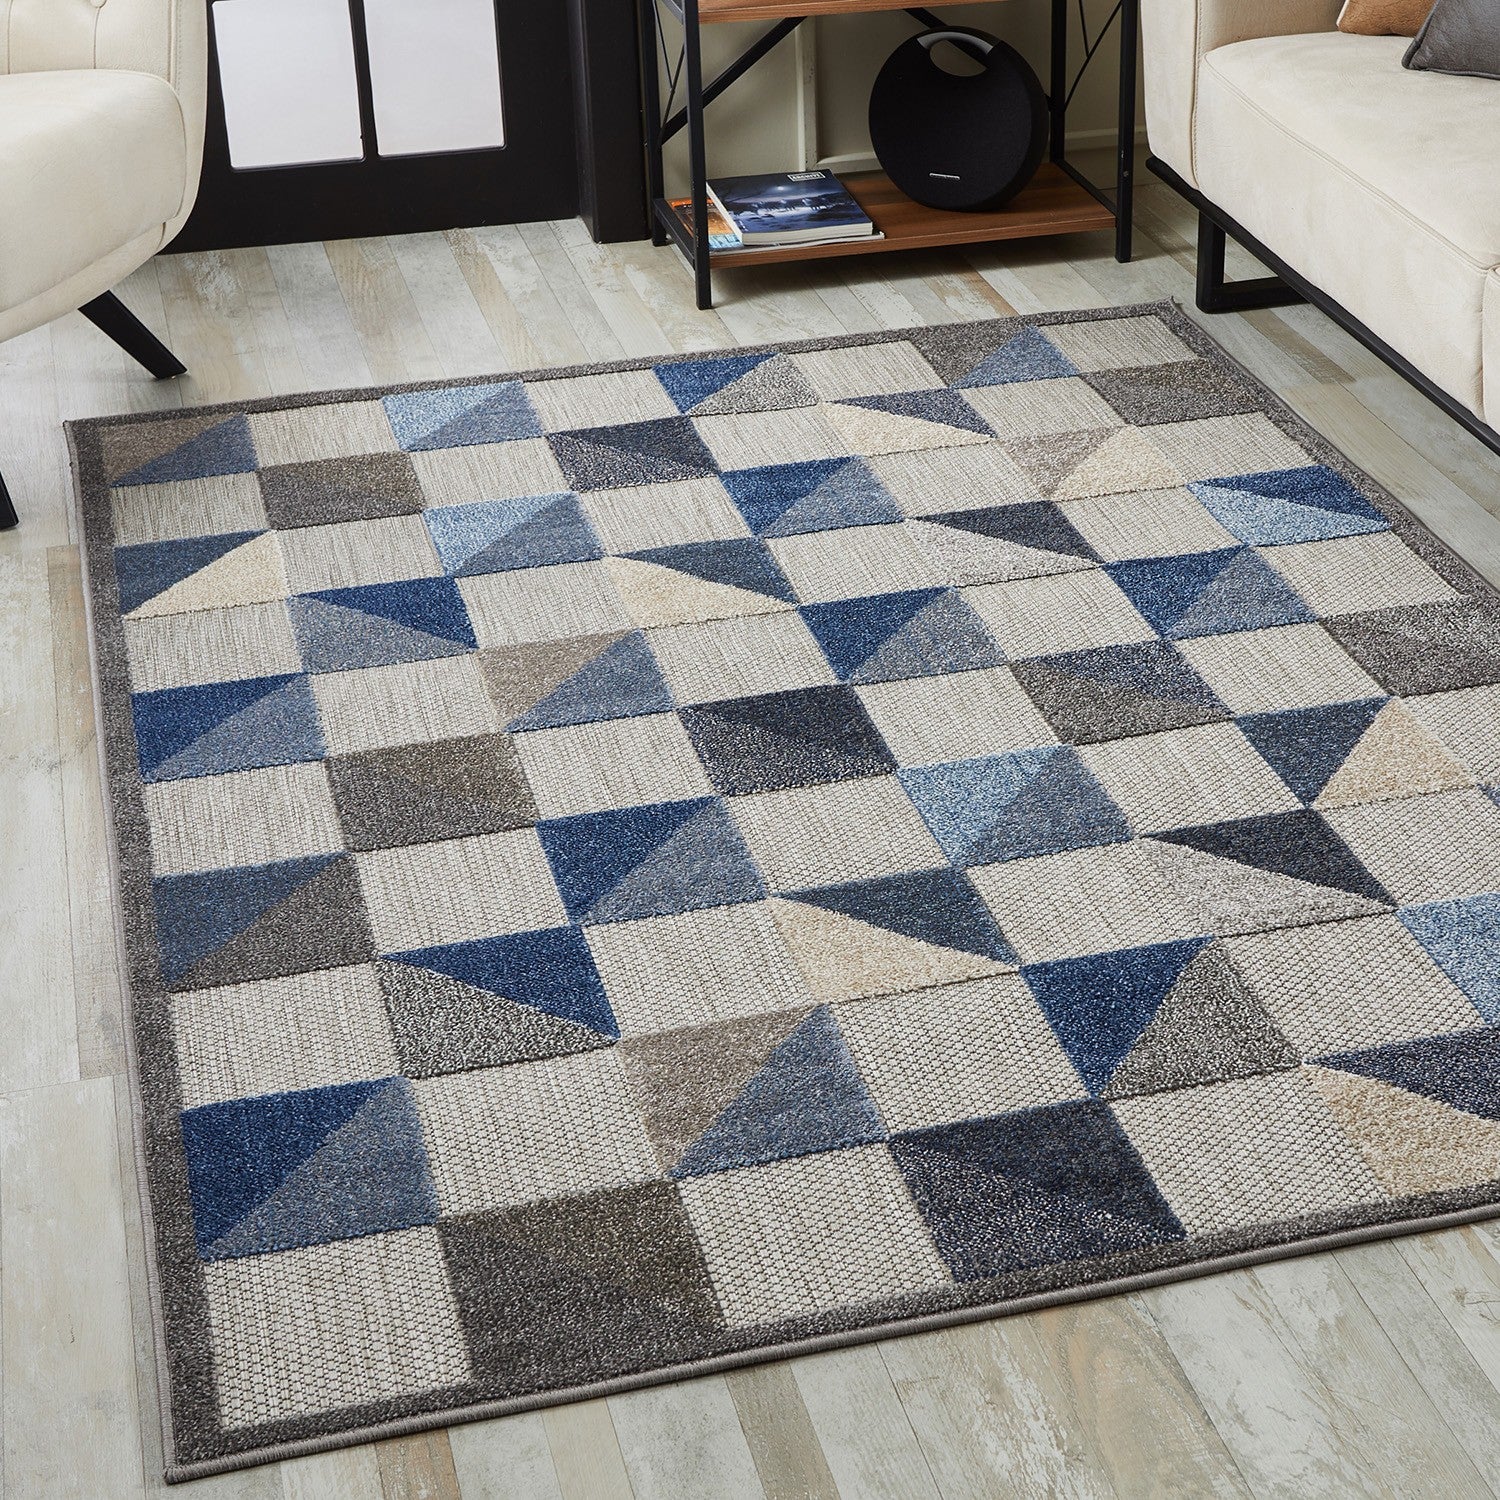 8' X 10' Blue And Gray Geometric Stain Resistant Indoor Outdoor Area Rug